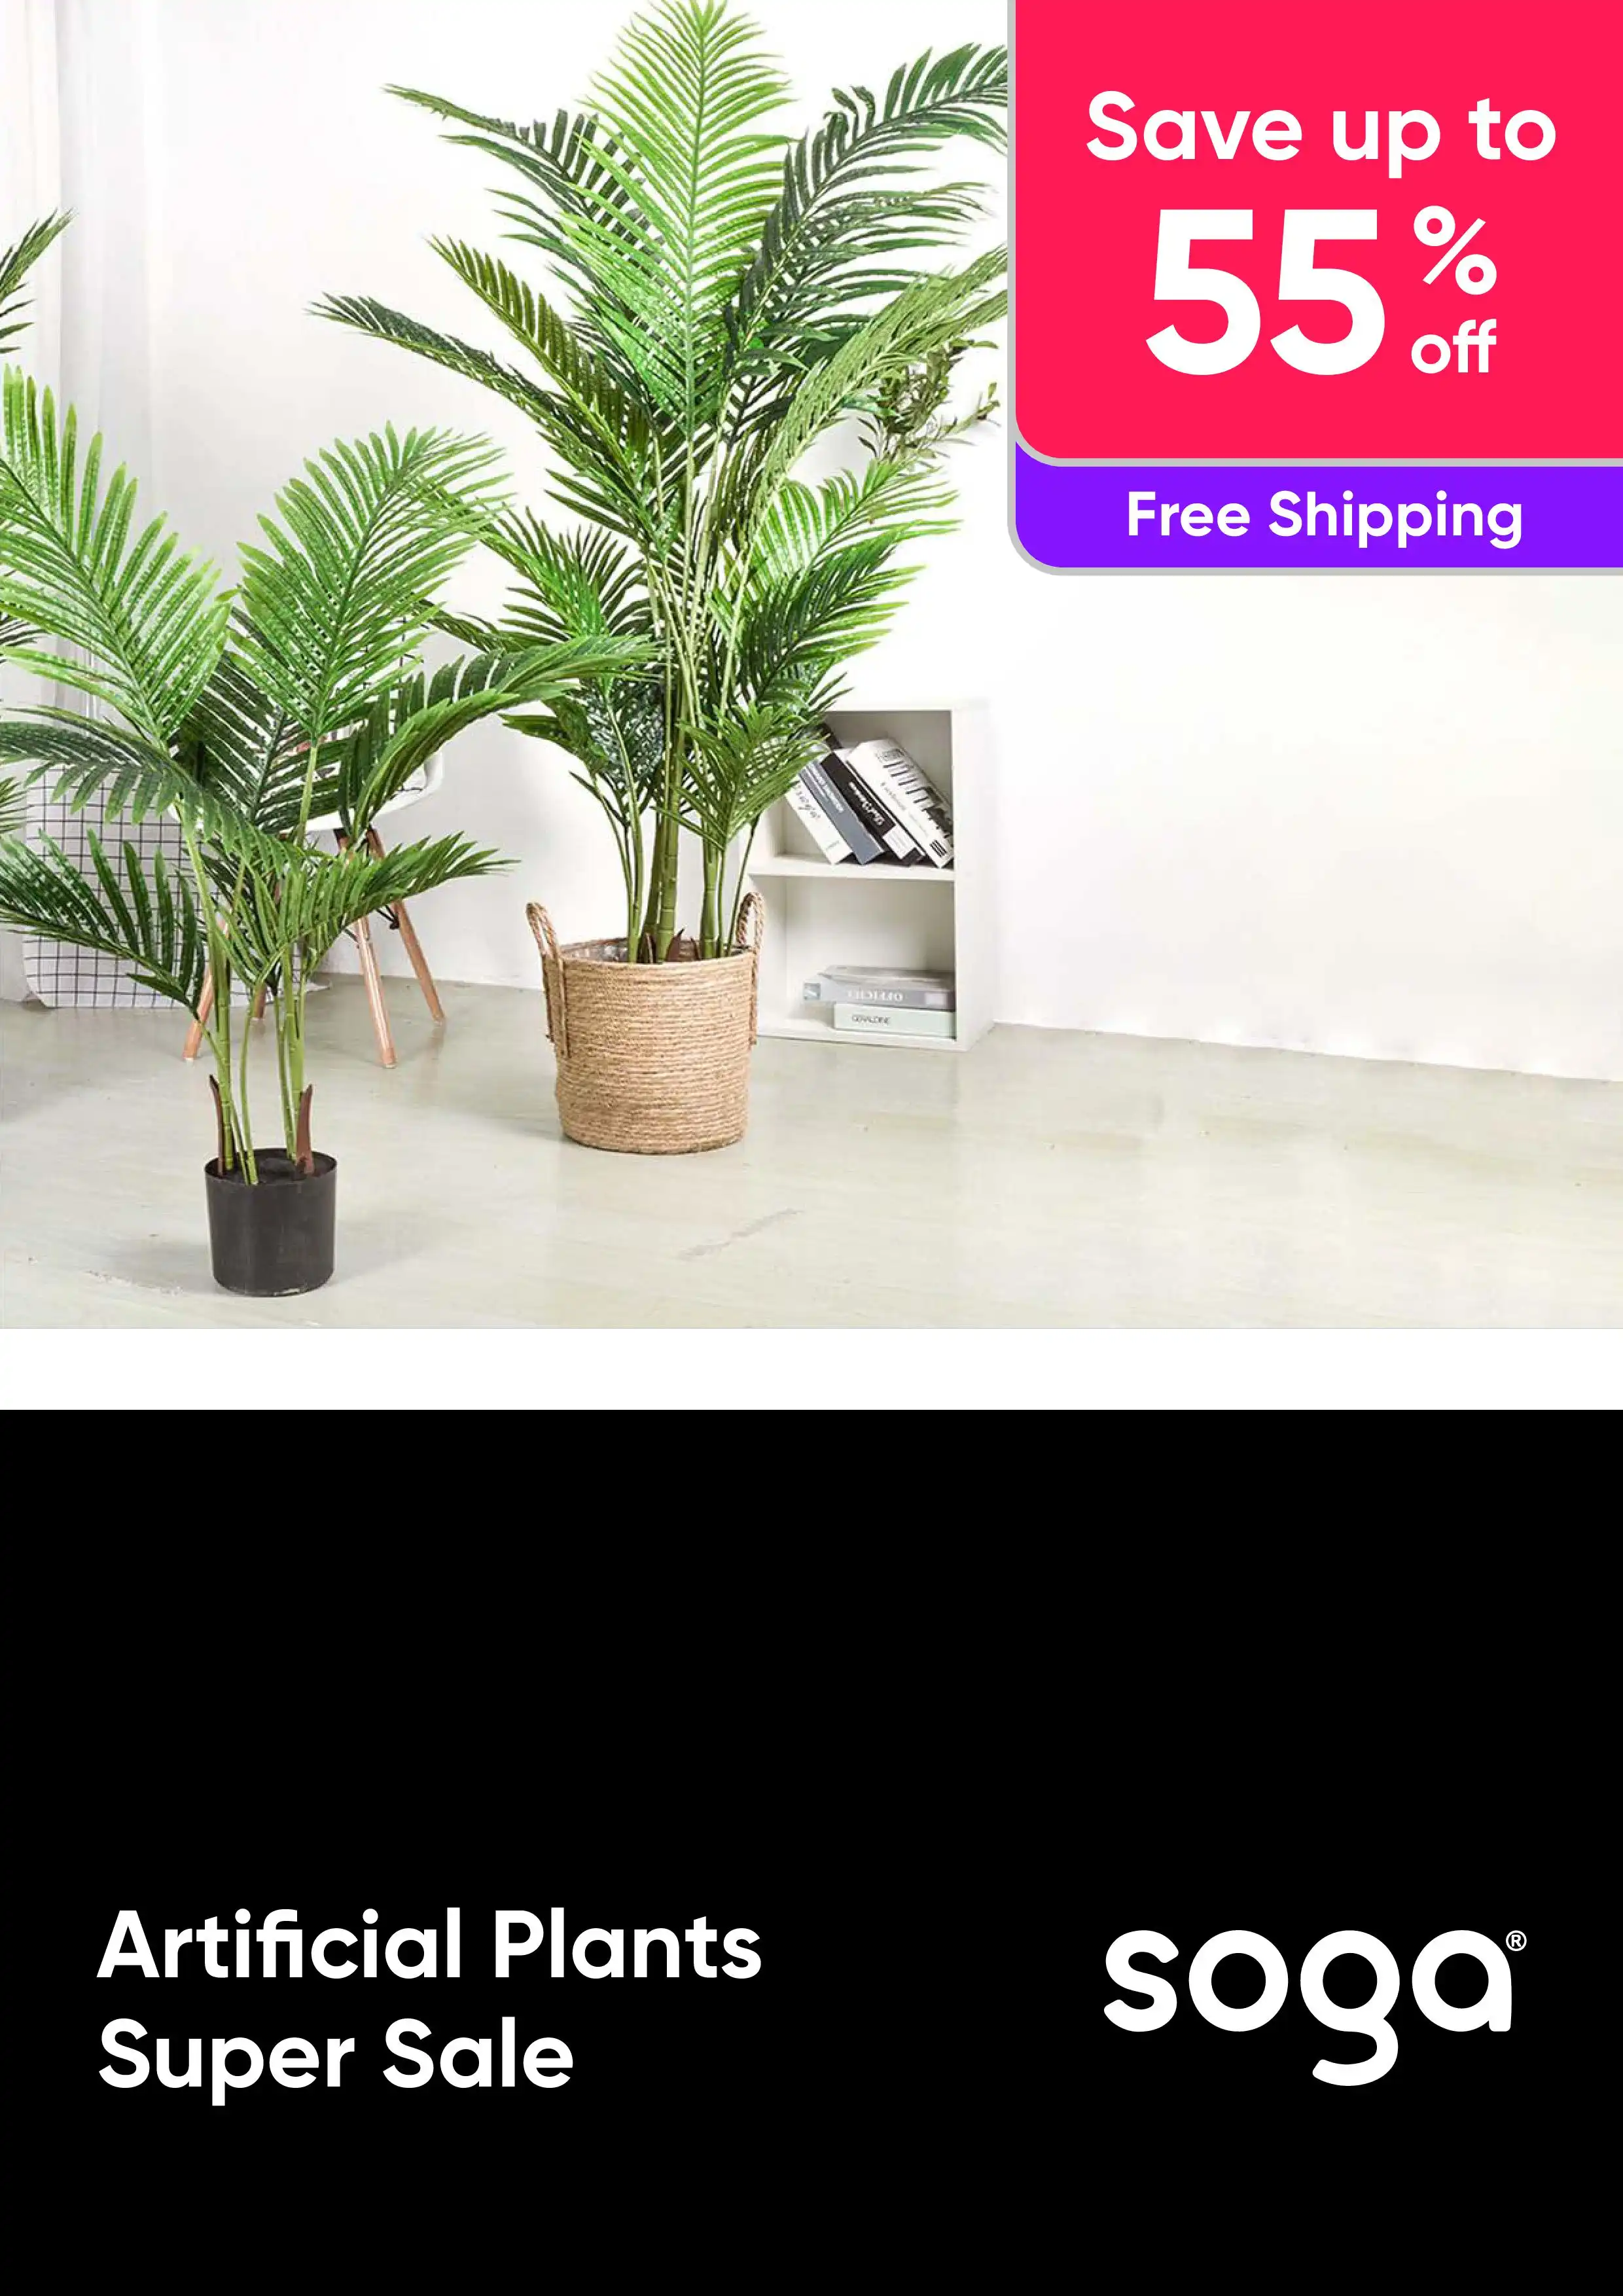 Artificial Plants Super Sale - Up To 55% Off + Free Shipping